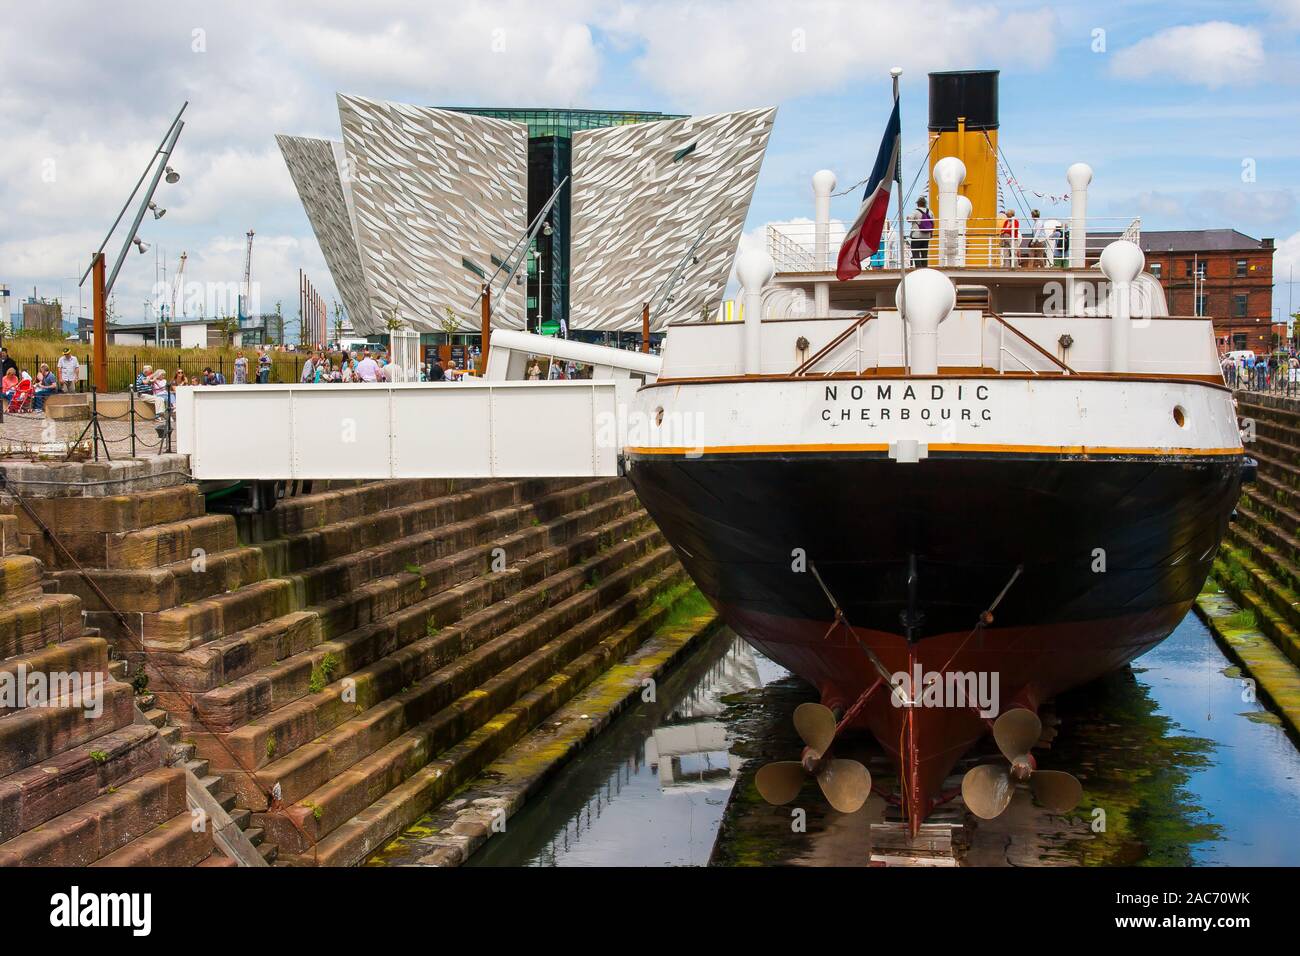 3 July 2017 The S S Nomadic, tender to the Titanic, preserved in Dry dock at Belfast Shipyard's Titanic Quarter in Northern Ireland where it was built Stock Photo